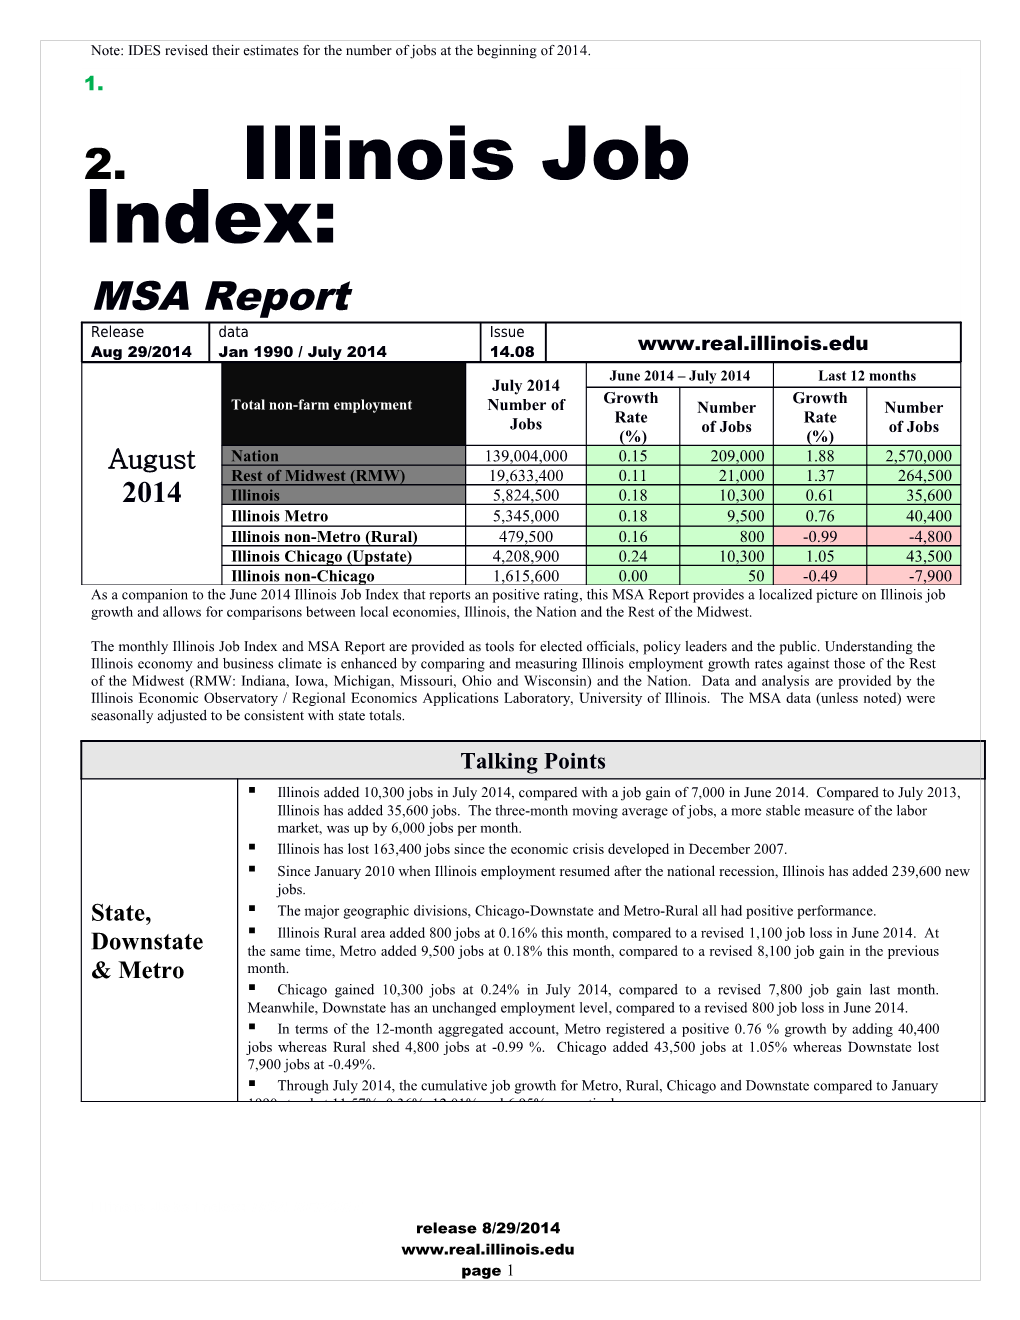 Note: IDES Revised Their Estimates for the Number of Jobs at the Beginning of 2014